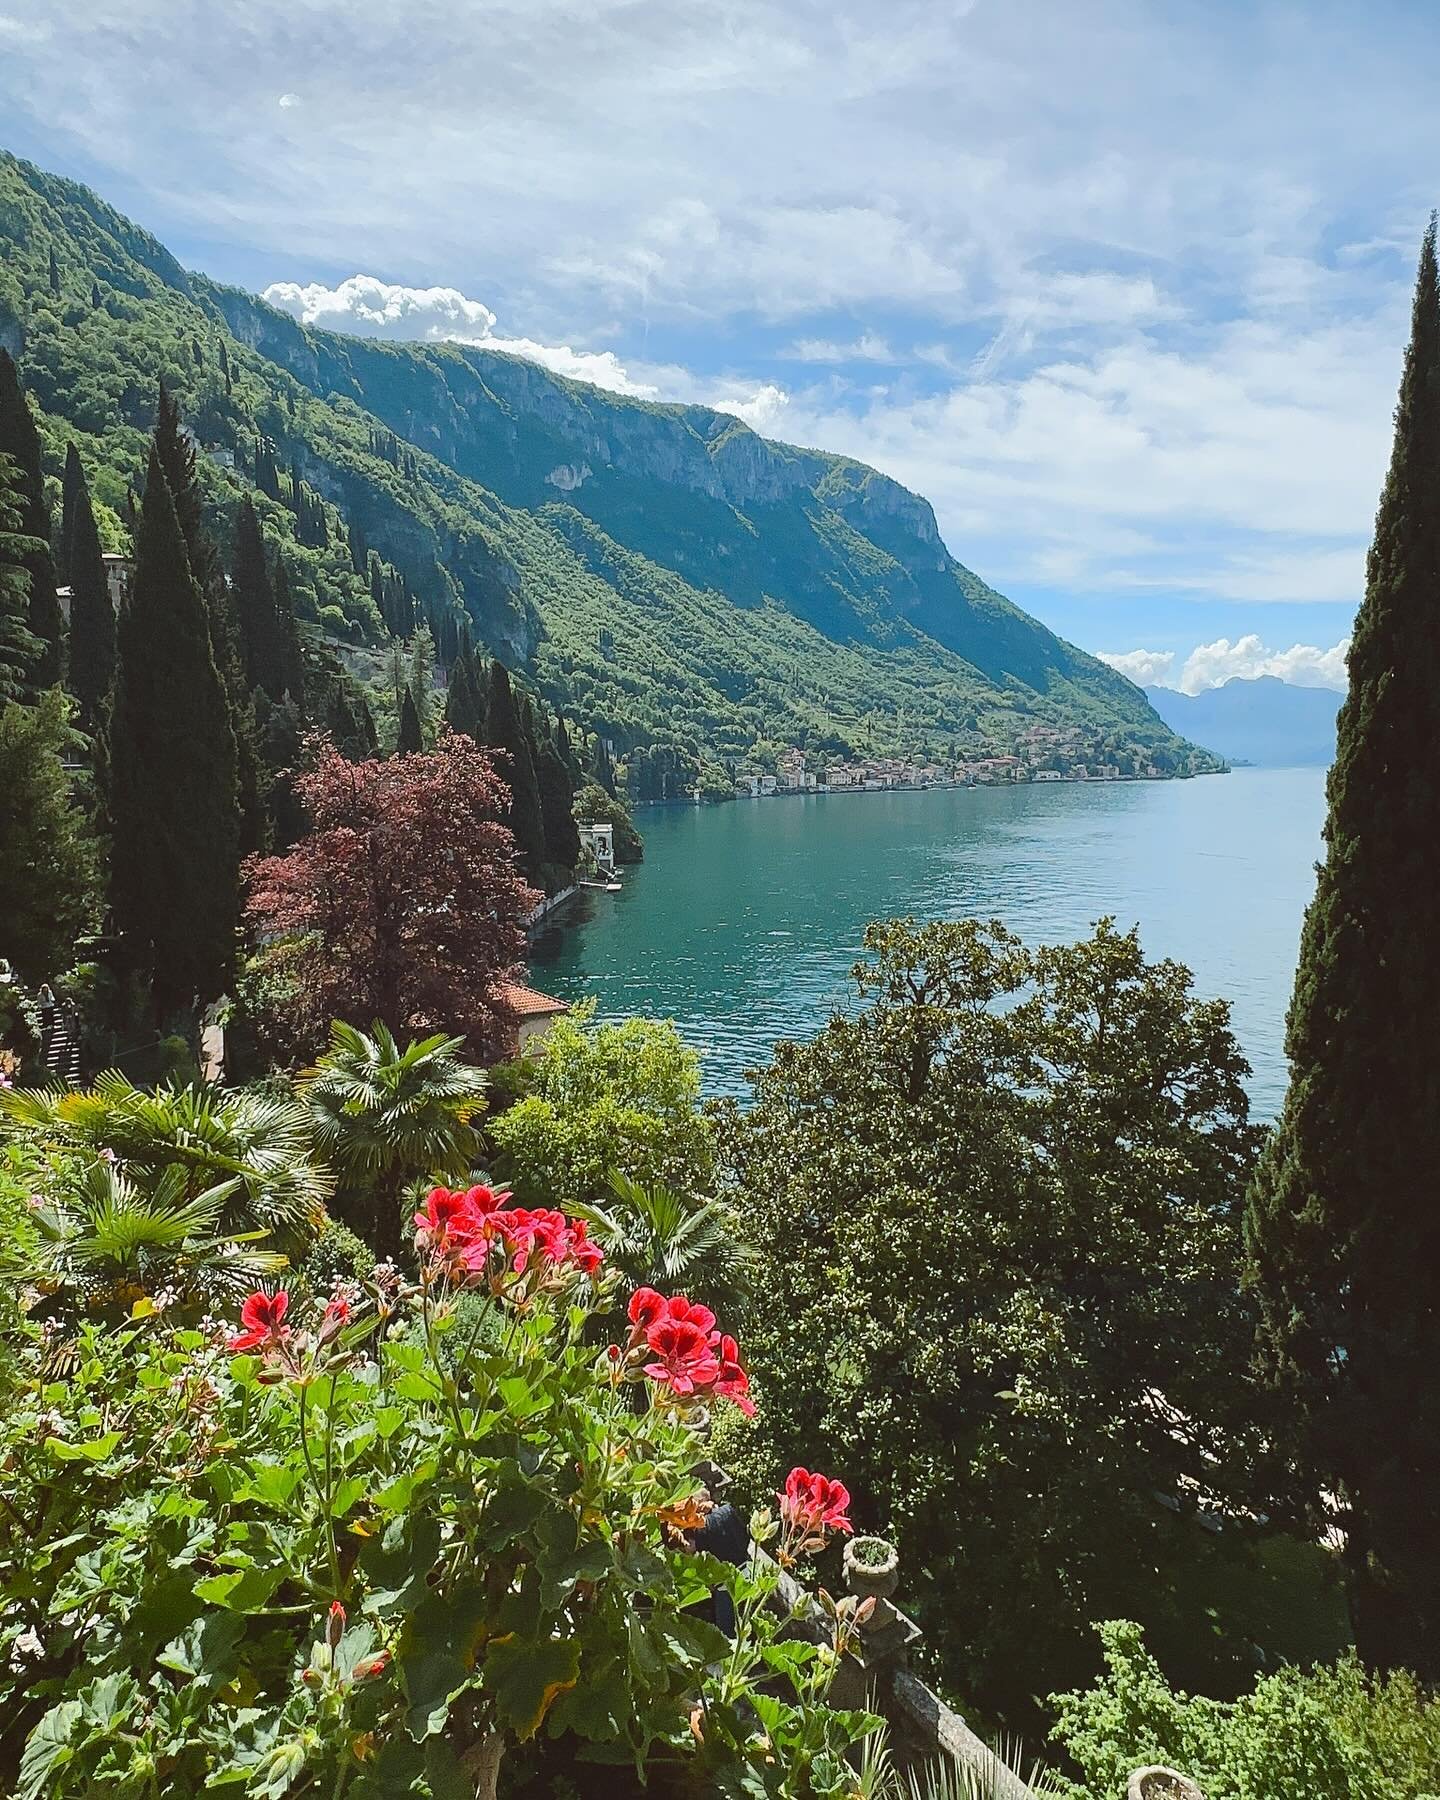 still processing the beauty of lake como.

and probably will be for a long while. 🌹 

we left the bustling cities and slowed down in Perledo for some rest and beauty. I found myself admiring my body the way I was admiring my surroundings&mdash;beari